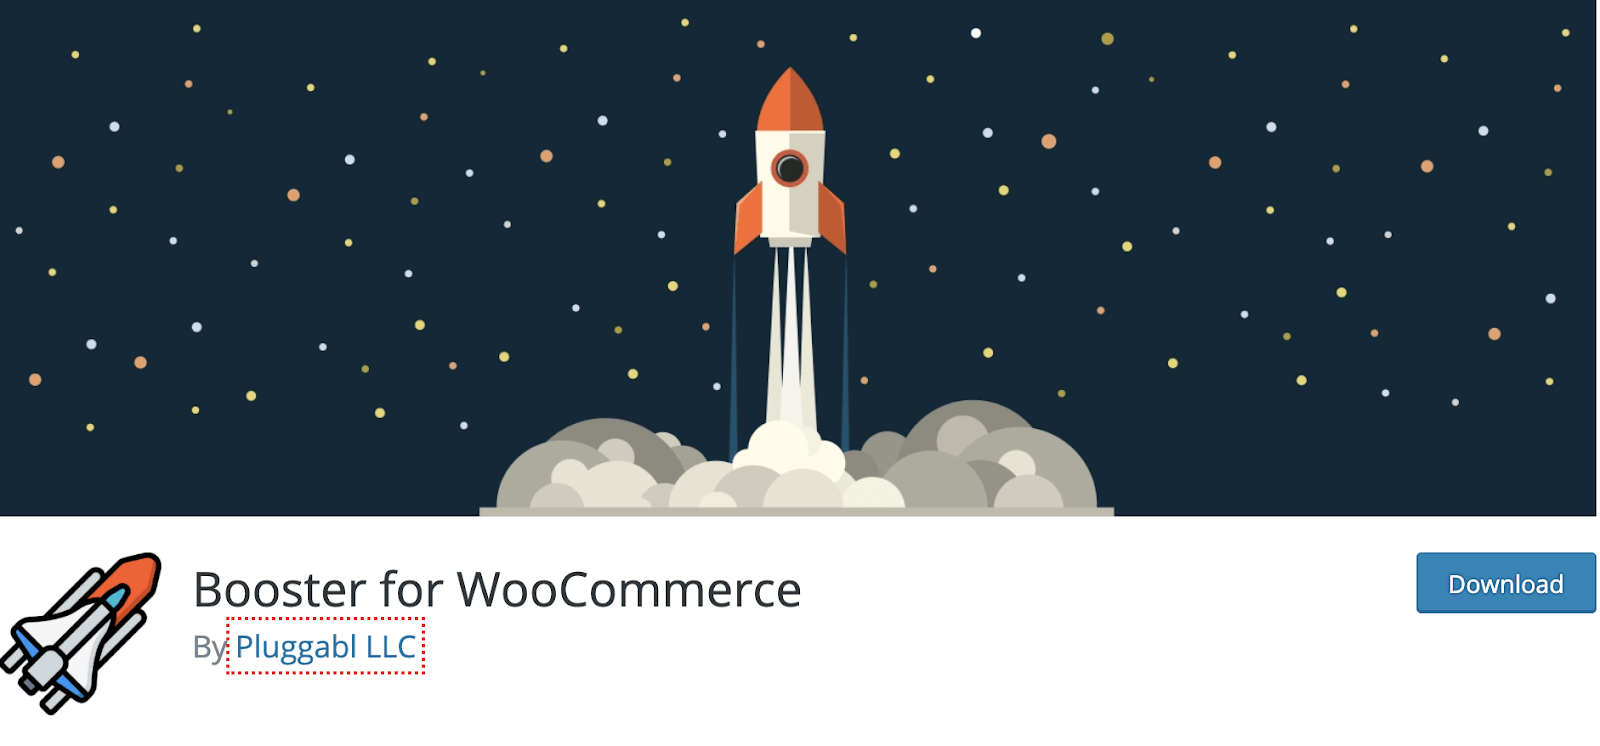 Booster for woocommerce